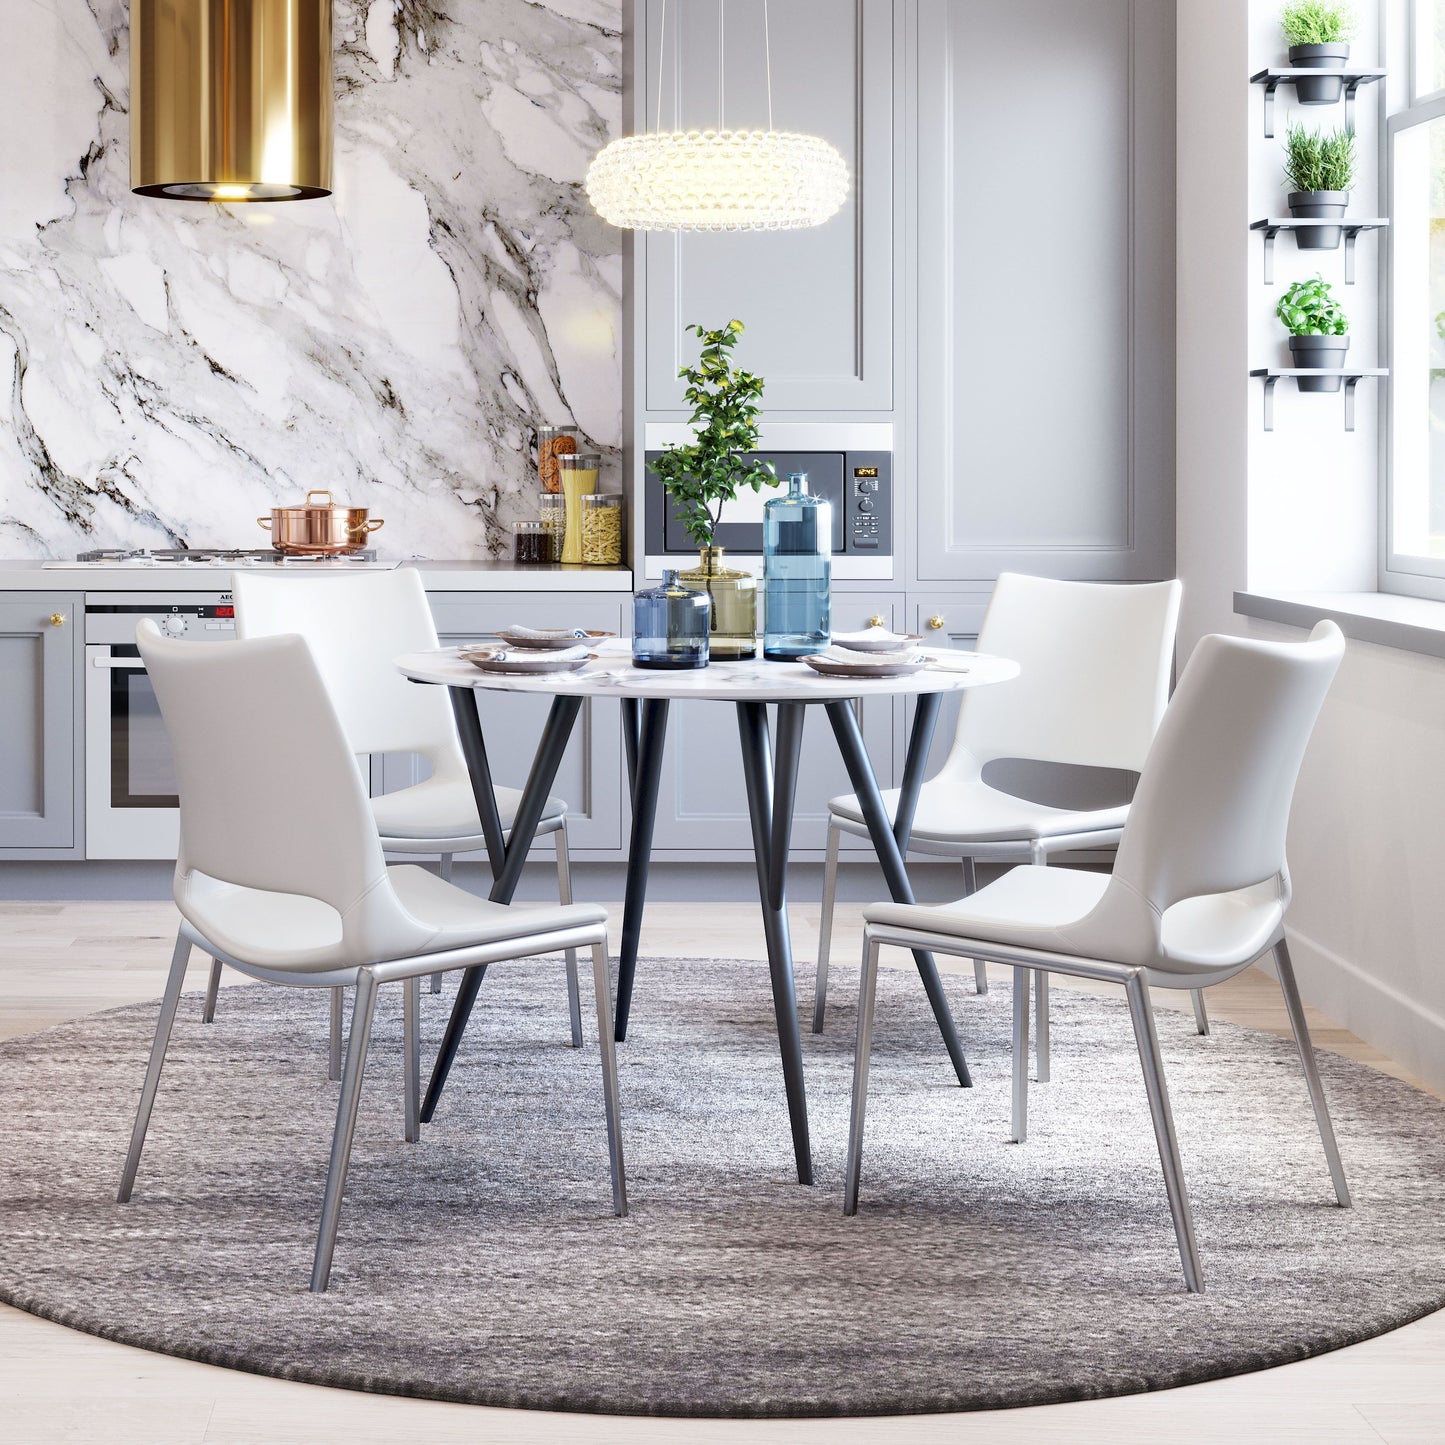 Ace Dining Chair White & Silver